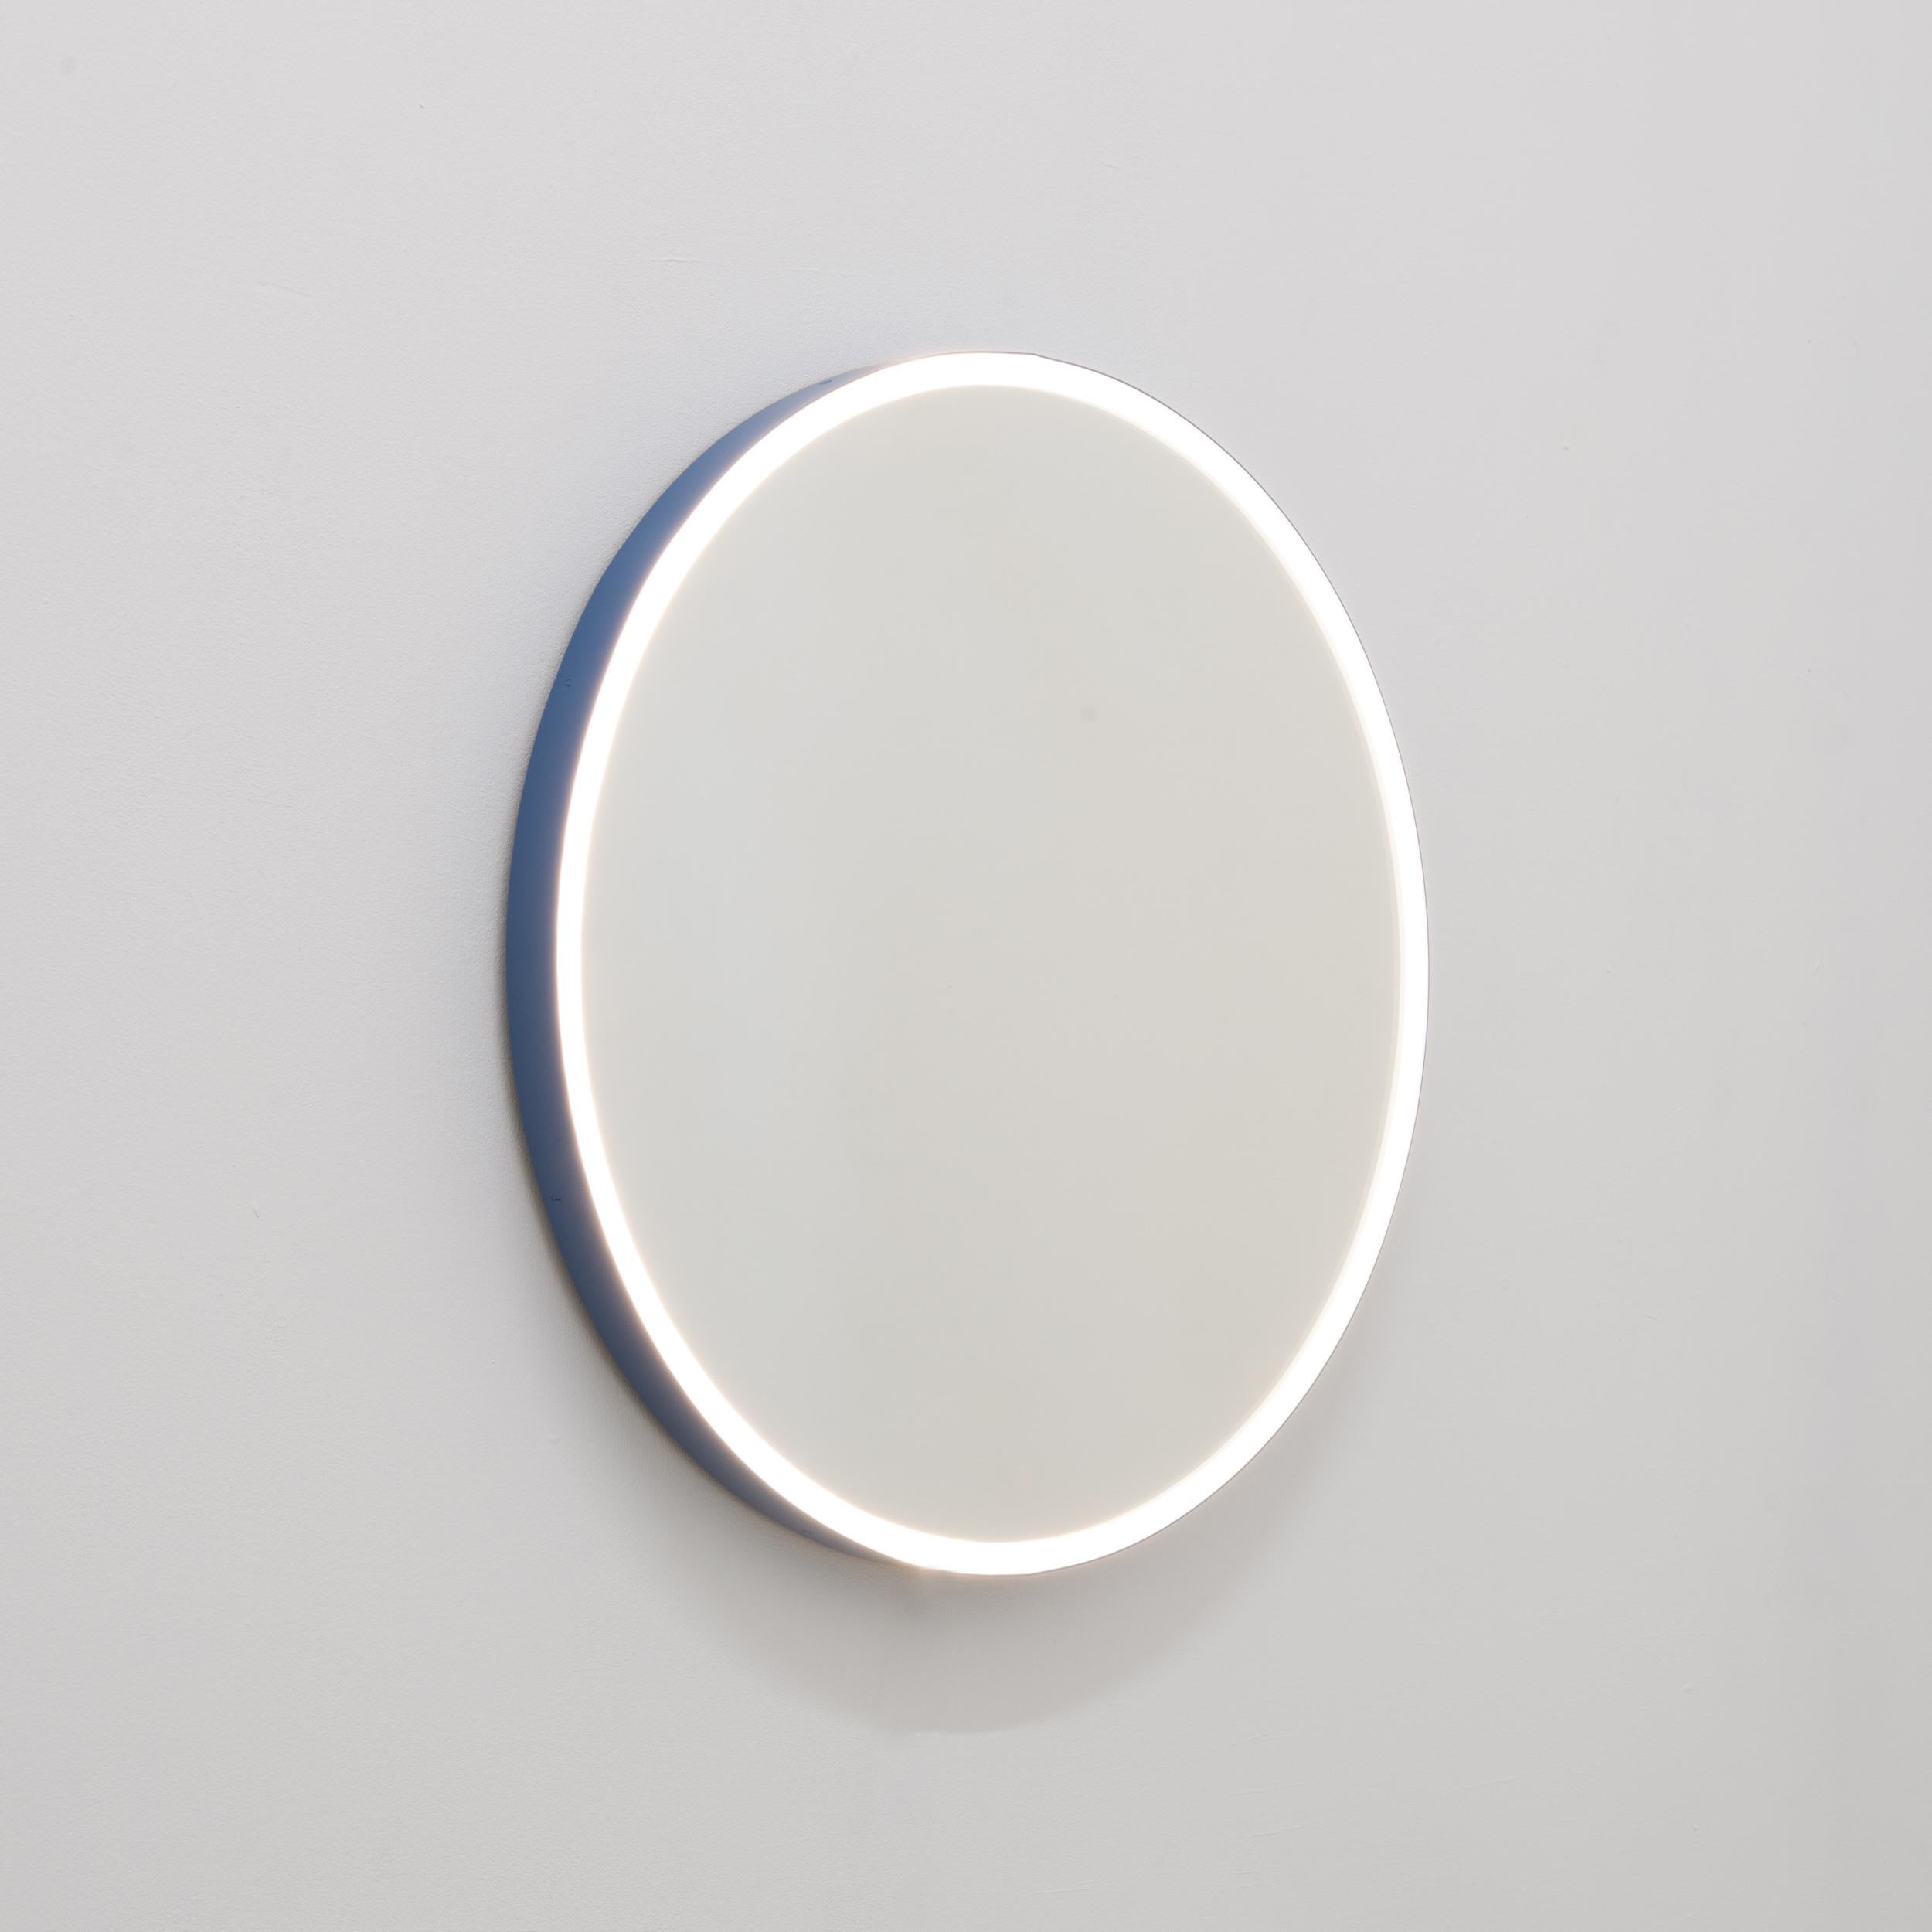 Charming round Orbis™ front Illuminated mirror with a modern powder coated blue frame (colour code RAL 5014) made to IP67 standard.

This mirror is fully customisable. It is illustrated with a warm light 3000K 14.4W/m, however the light temperature